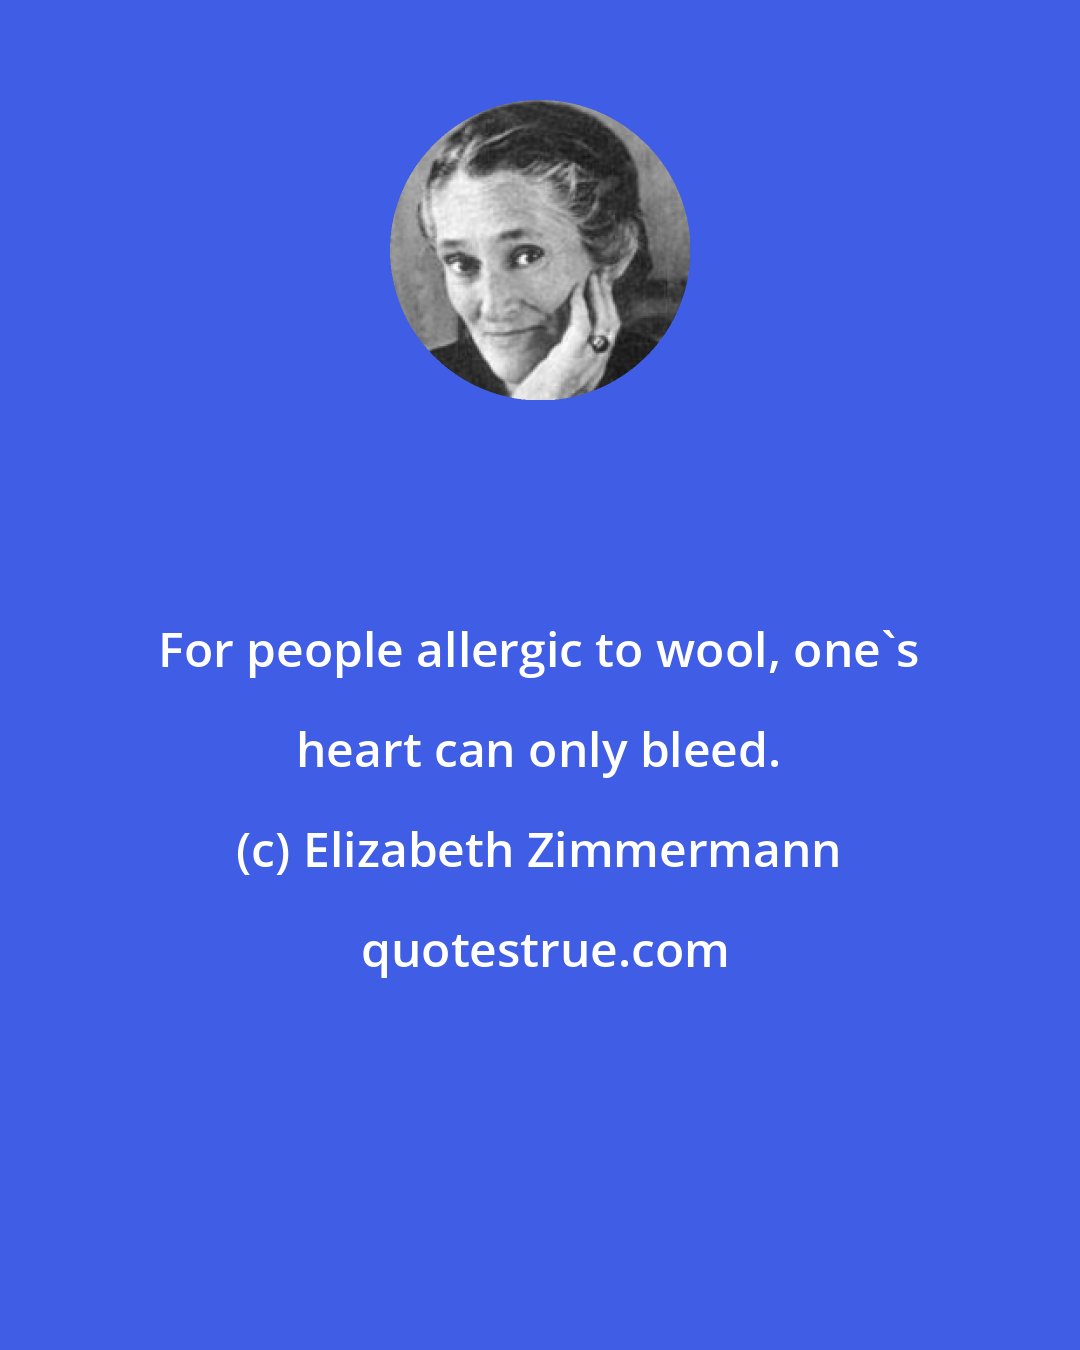 Elizabeth Zimmermann: For people allergic to wool, one's heart can only bleed.